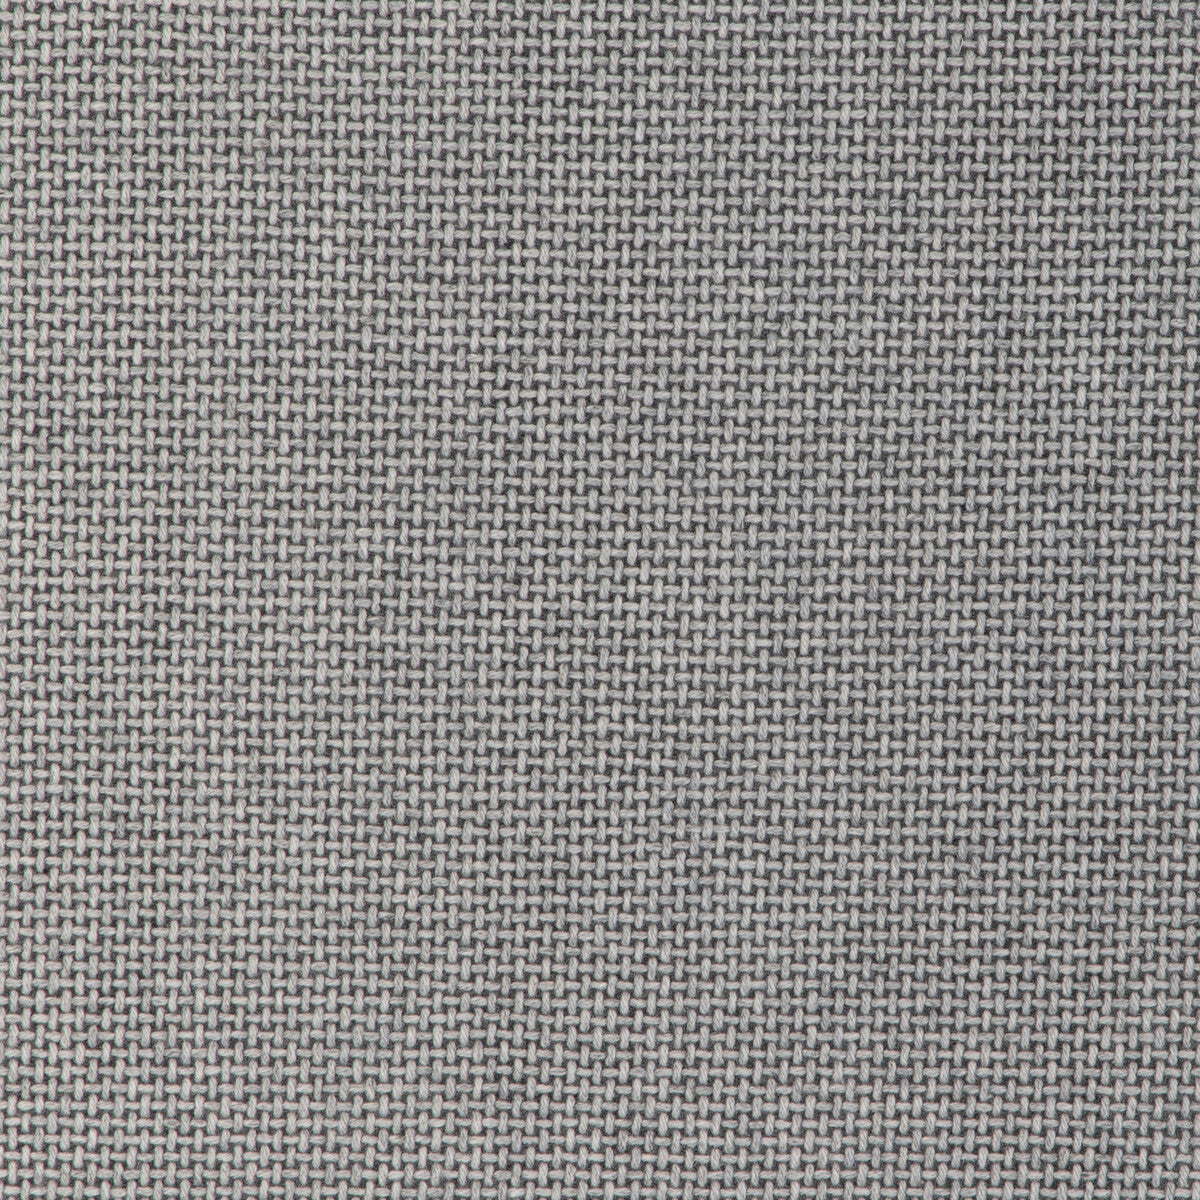 Easton Wool fabric in castle color - pattern 37027.11.0 - by Kravet Contract